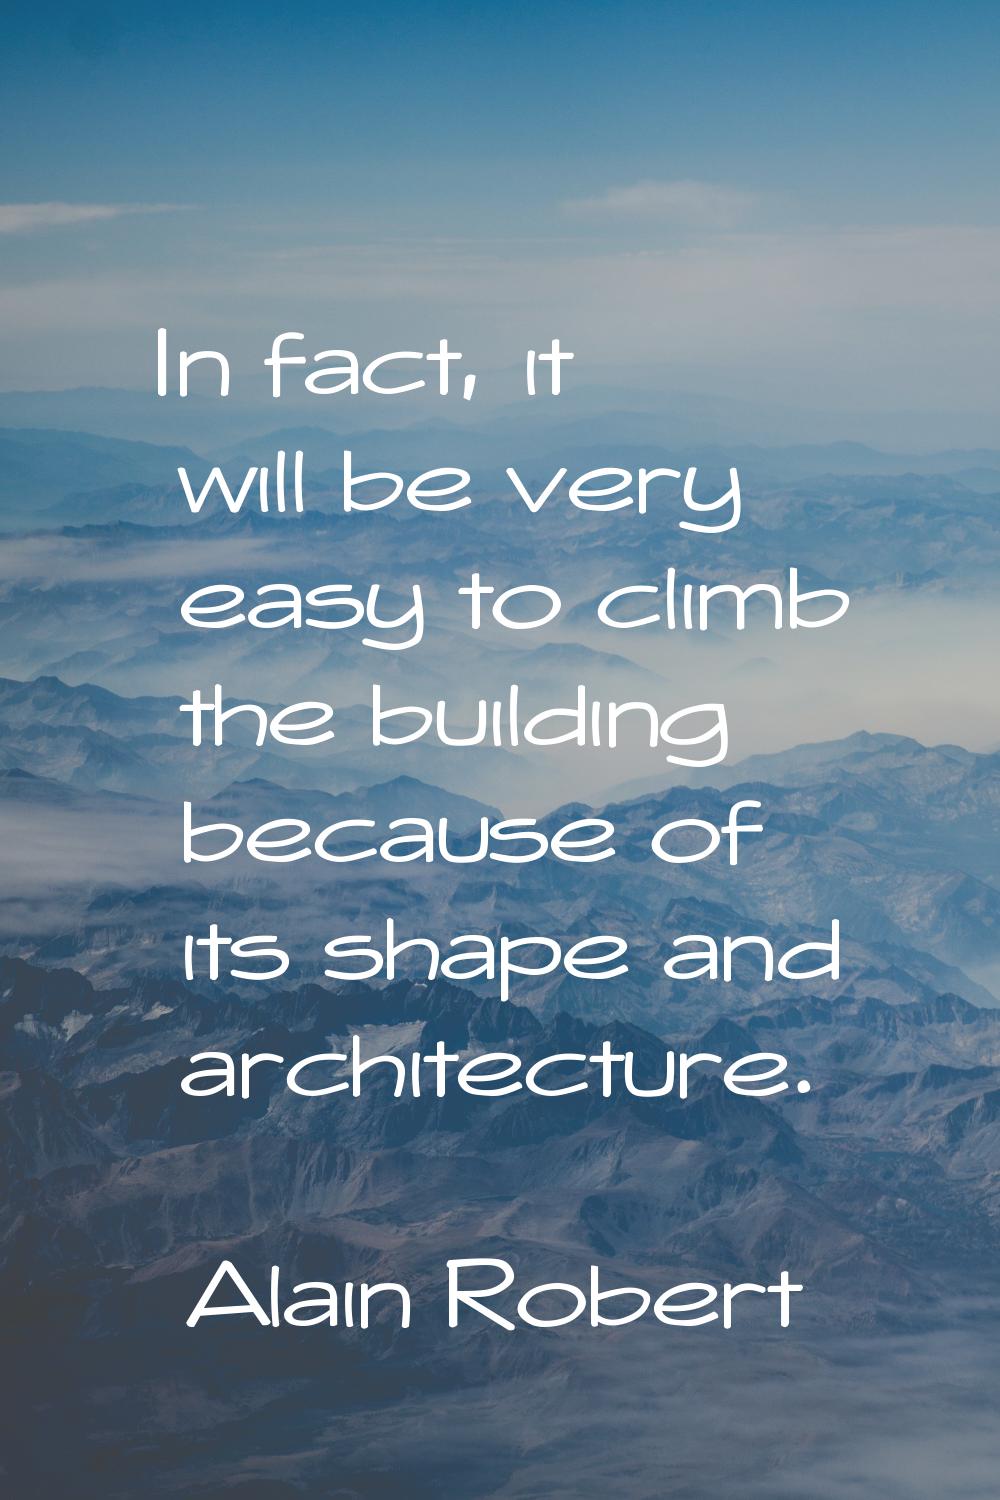 In fact, it will be very easy to climb the building because of its shape and architecture.